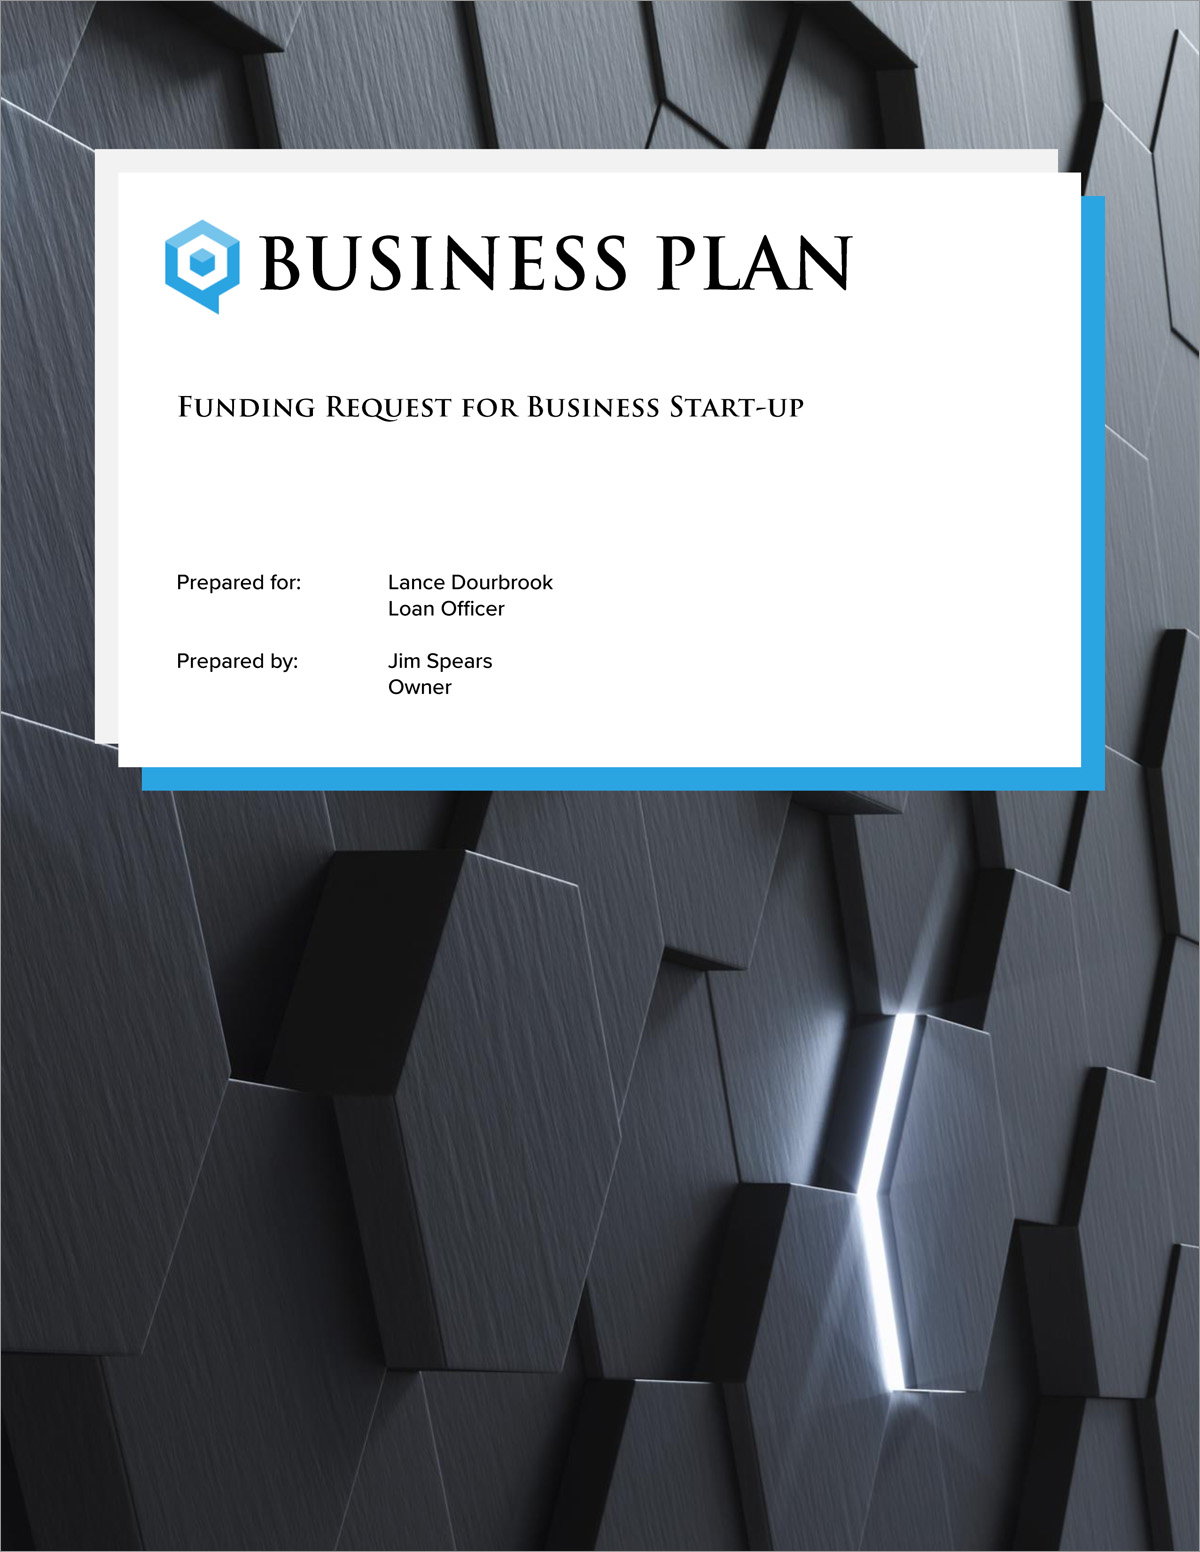 technology section of business plan